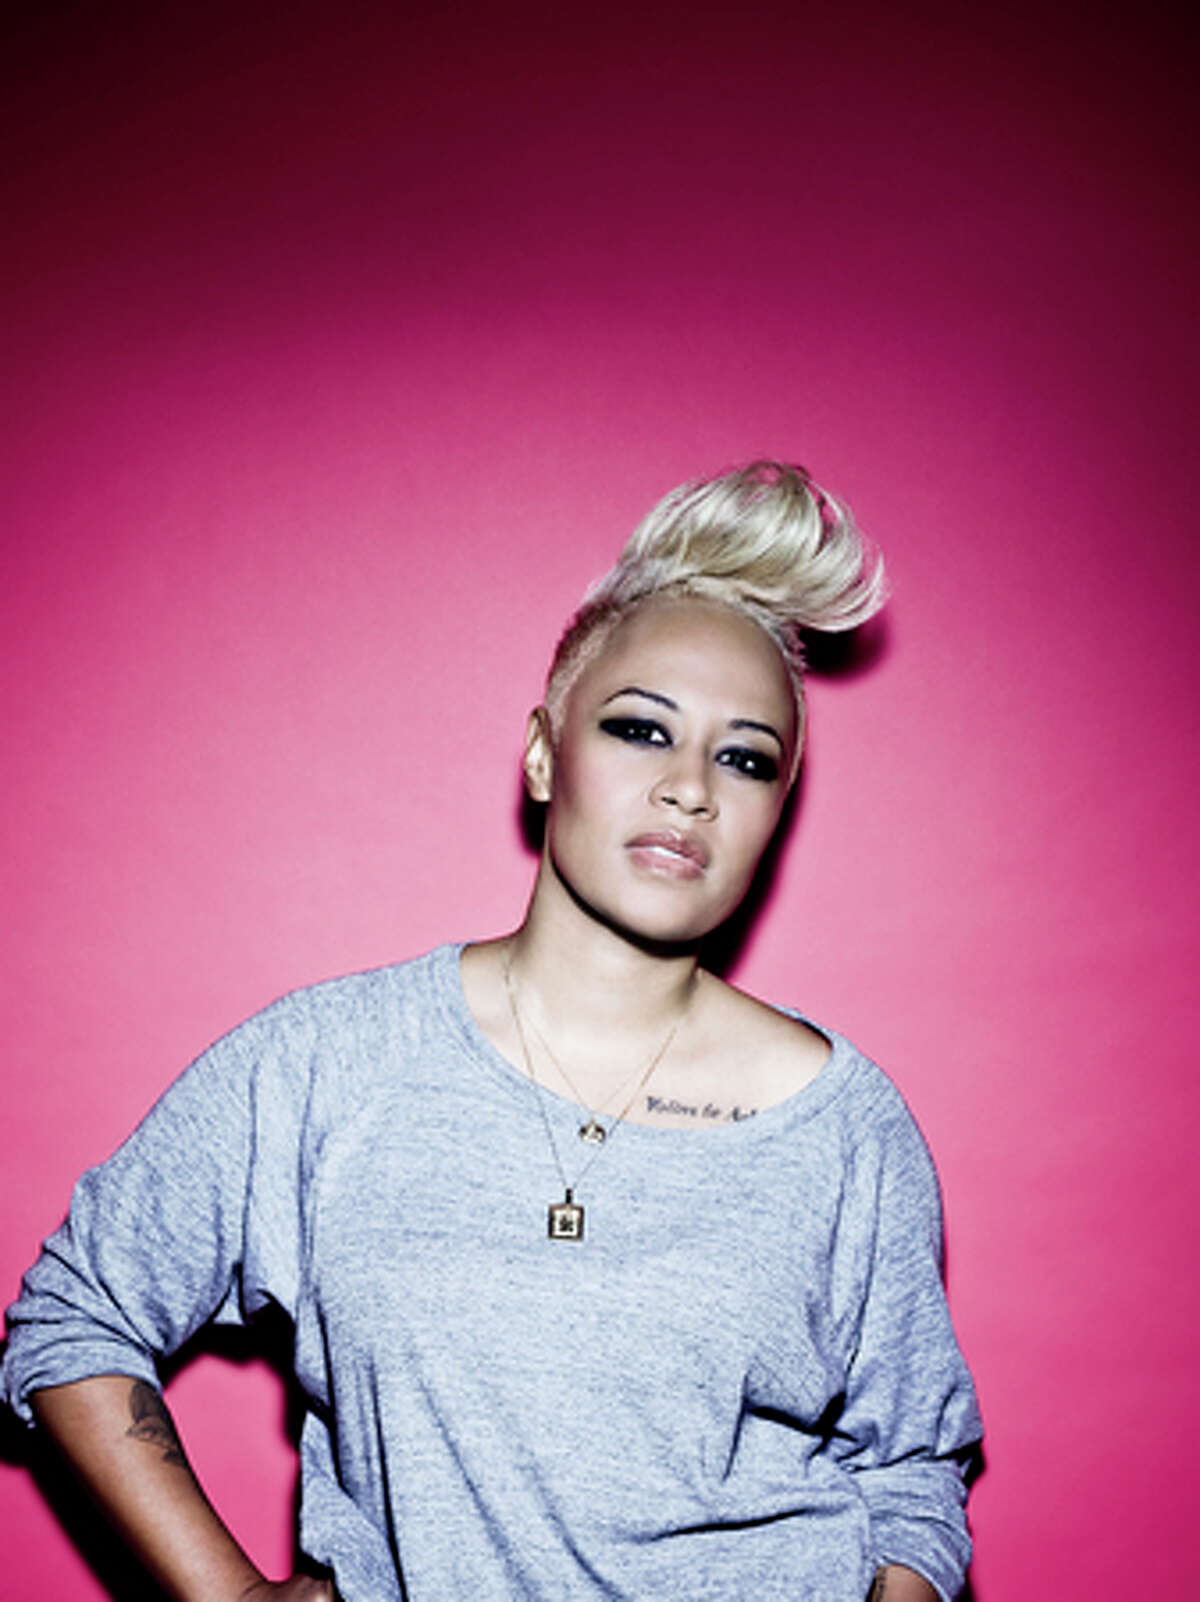 British singer Emeli Sandé recalls the style of many classic artists and yet has a sound all her own.